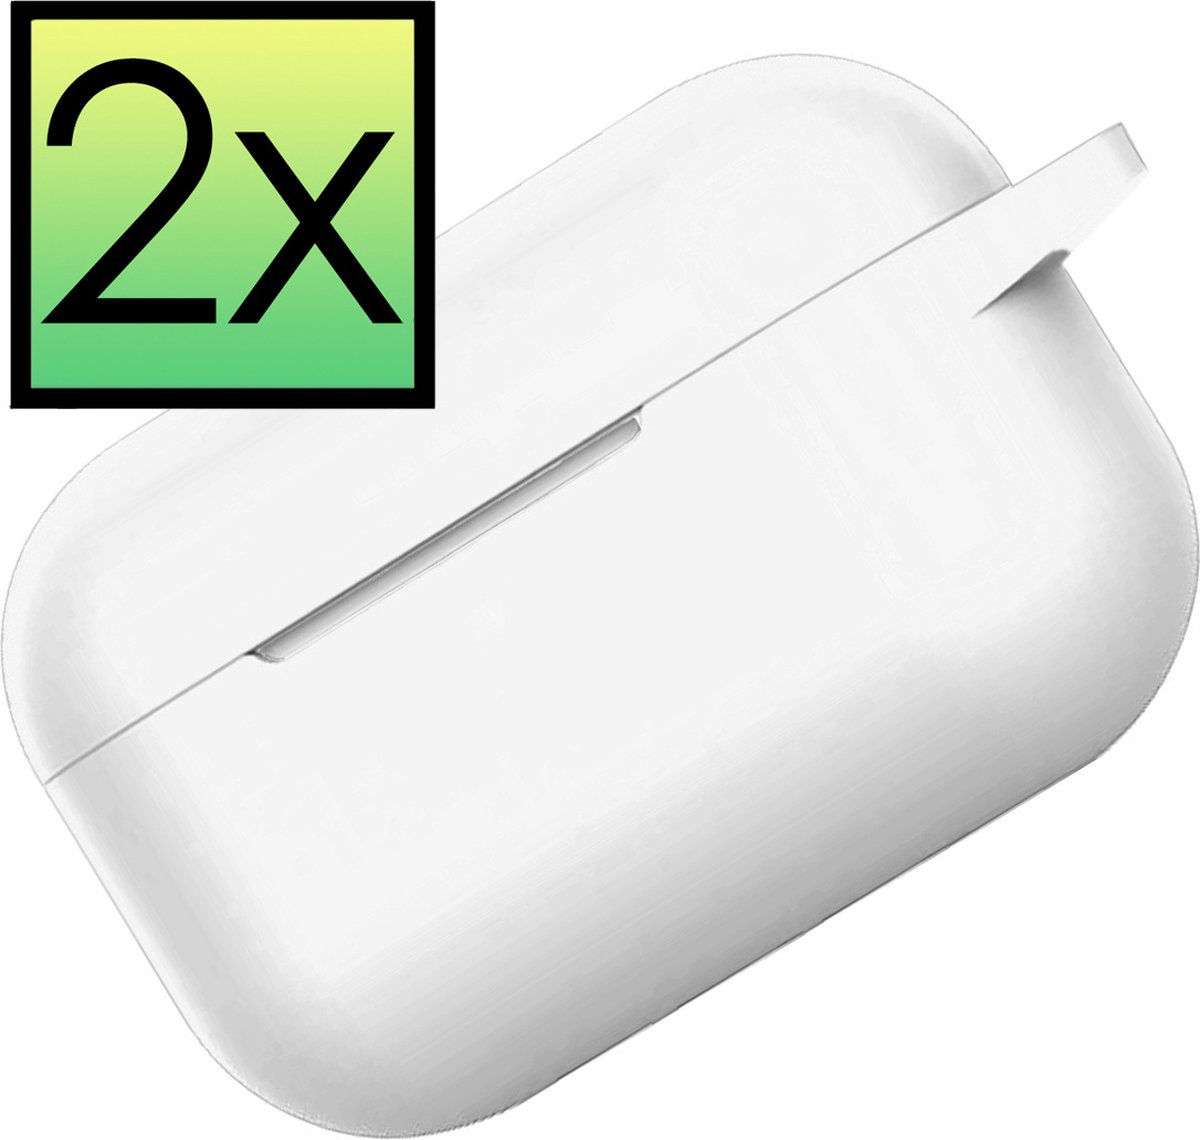 Hoes Geschikt voor AirPods Pro 2 Hoesje Cover Silicone Case Hoes - Wit - 2x